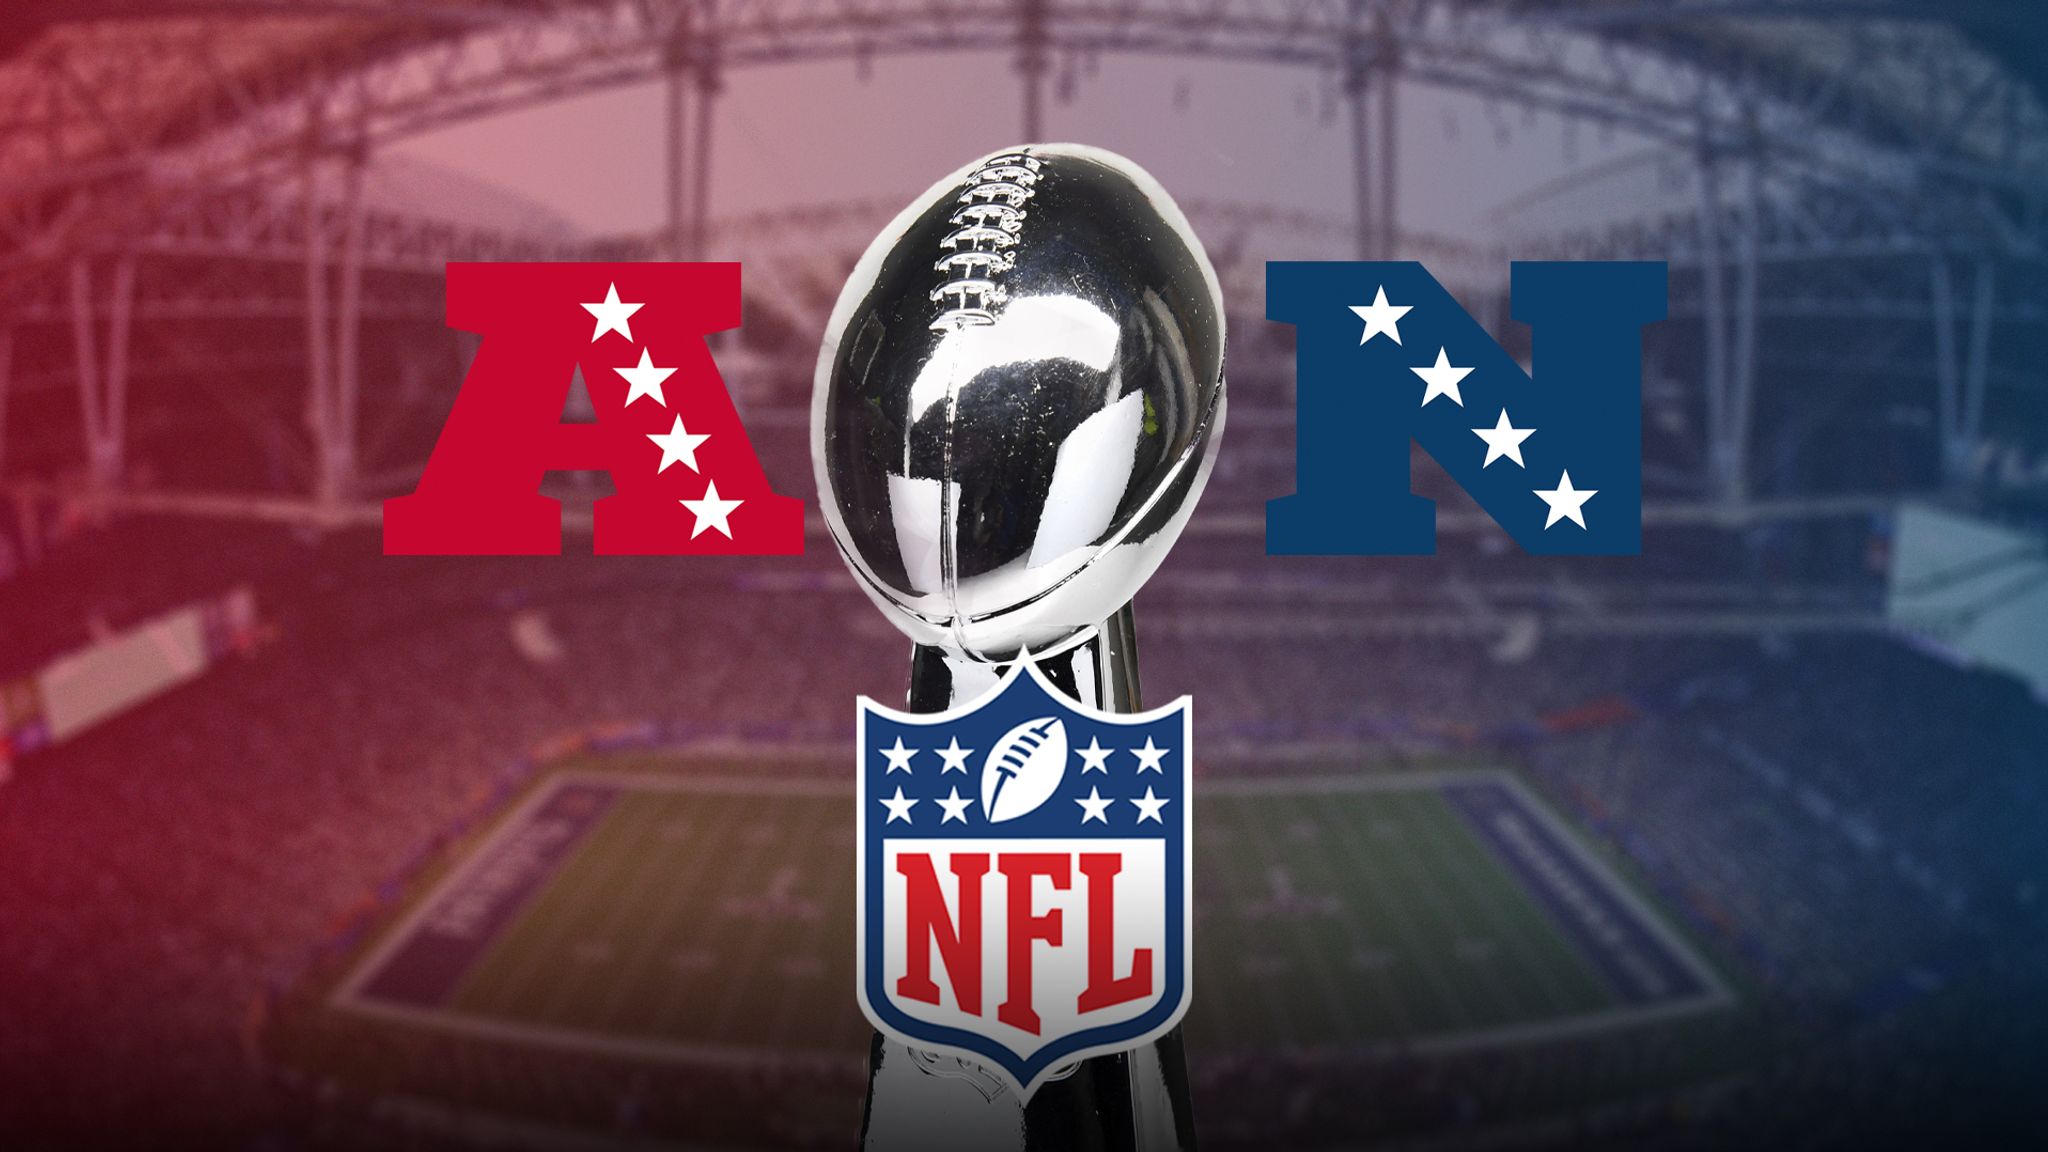 afc playoff game live